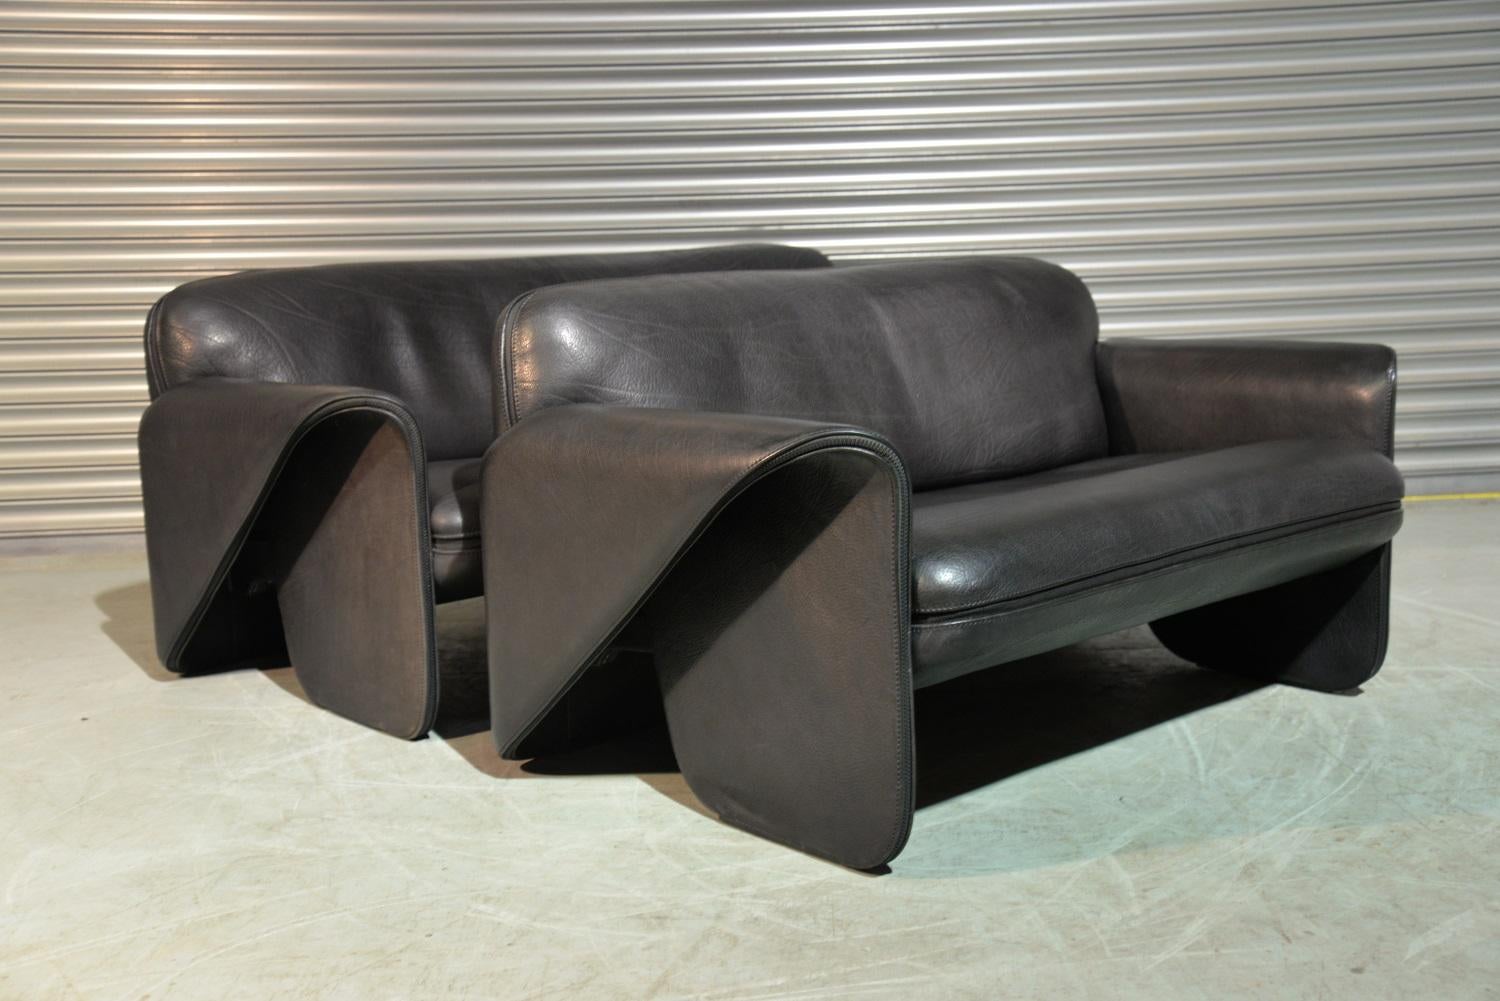 We are delighted to bring to you an ultra rare pair of vintage De Sede DS 125 sofas designed by Gerd Lange in 1978. These sculptural pieces are upholstered in thick 3mm-5mm black leather with a decorative zipper seam. These pieces are in excellent